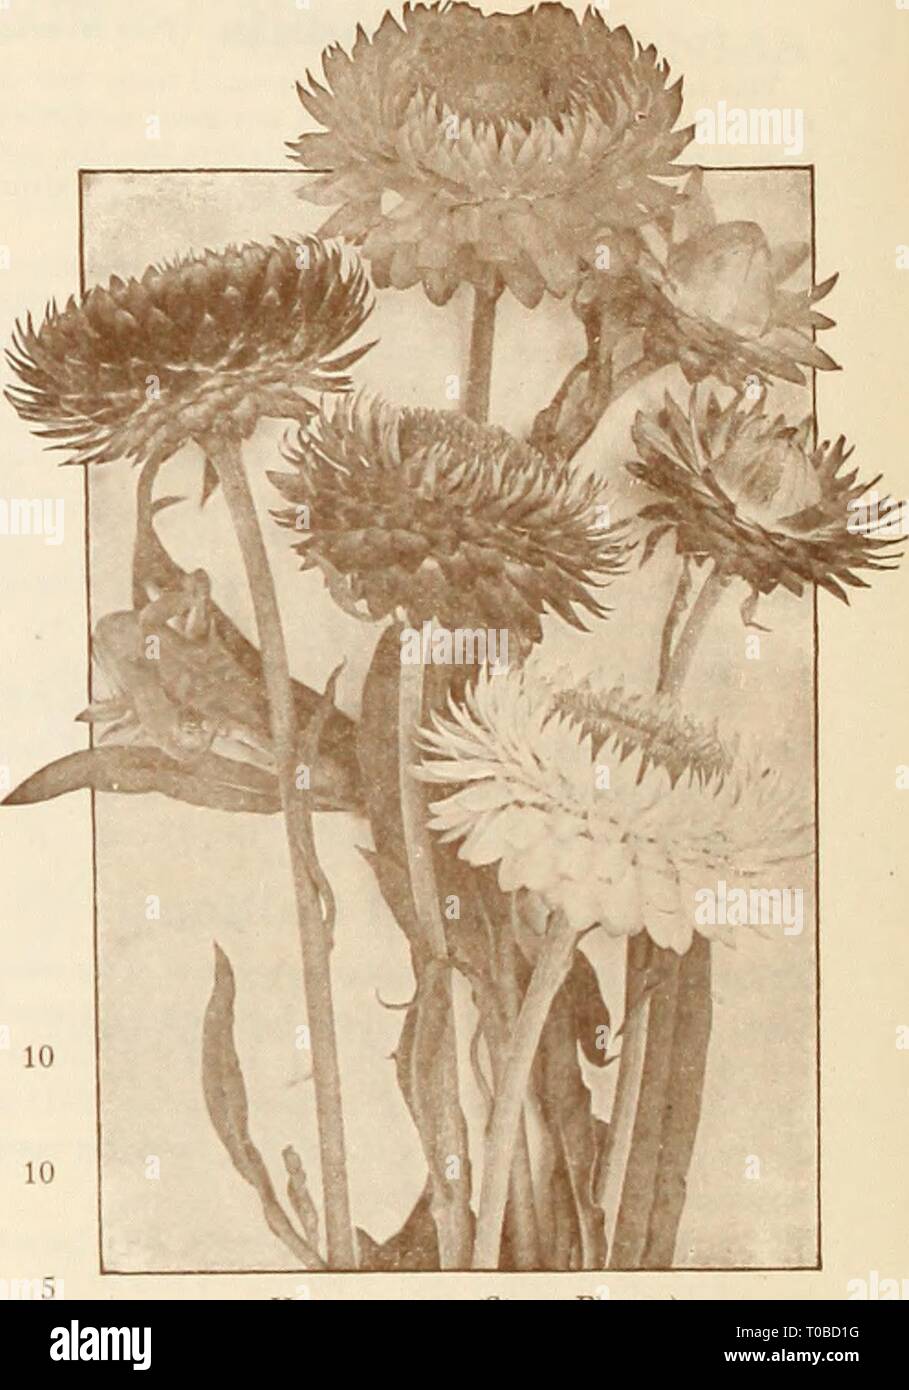 Dreer's garden book 1925 (1925) Dreer's garden book 1925 dreersgardenbook1925henr 0 Year: 1925  /flEBRyAJREElt^ RELIABLE FLOWER SEEDS, &gt;HILSHEIiPHRlk HelianthuS (SunOower) Remarkable for the stately growth, size and brilliancy of their flowers, making a very good effect among shrubbery and for screens. Annual Sunflowers The annual Sunflowers are indispensable for cutting. Sown on a sunny spot in April or May they come into bloom early in summer, and keep up a constant supply of flowers until cut down by frost. PER PKT. 2696 Cucumerifolius {Miniature Sunflower). Small, single, rich yellow f Stock Photo